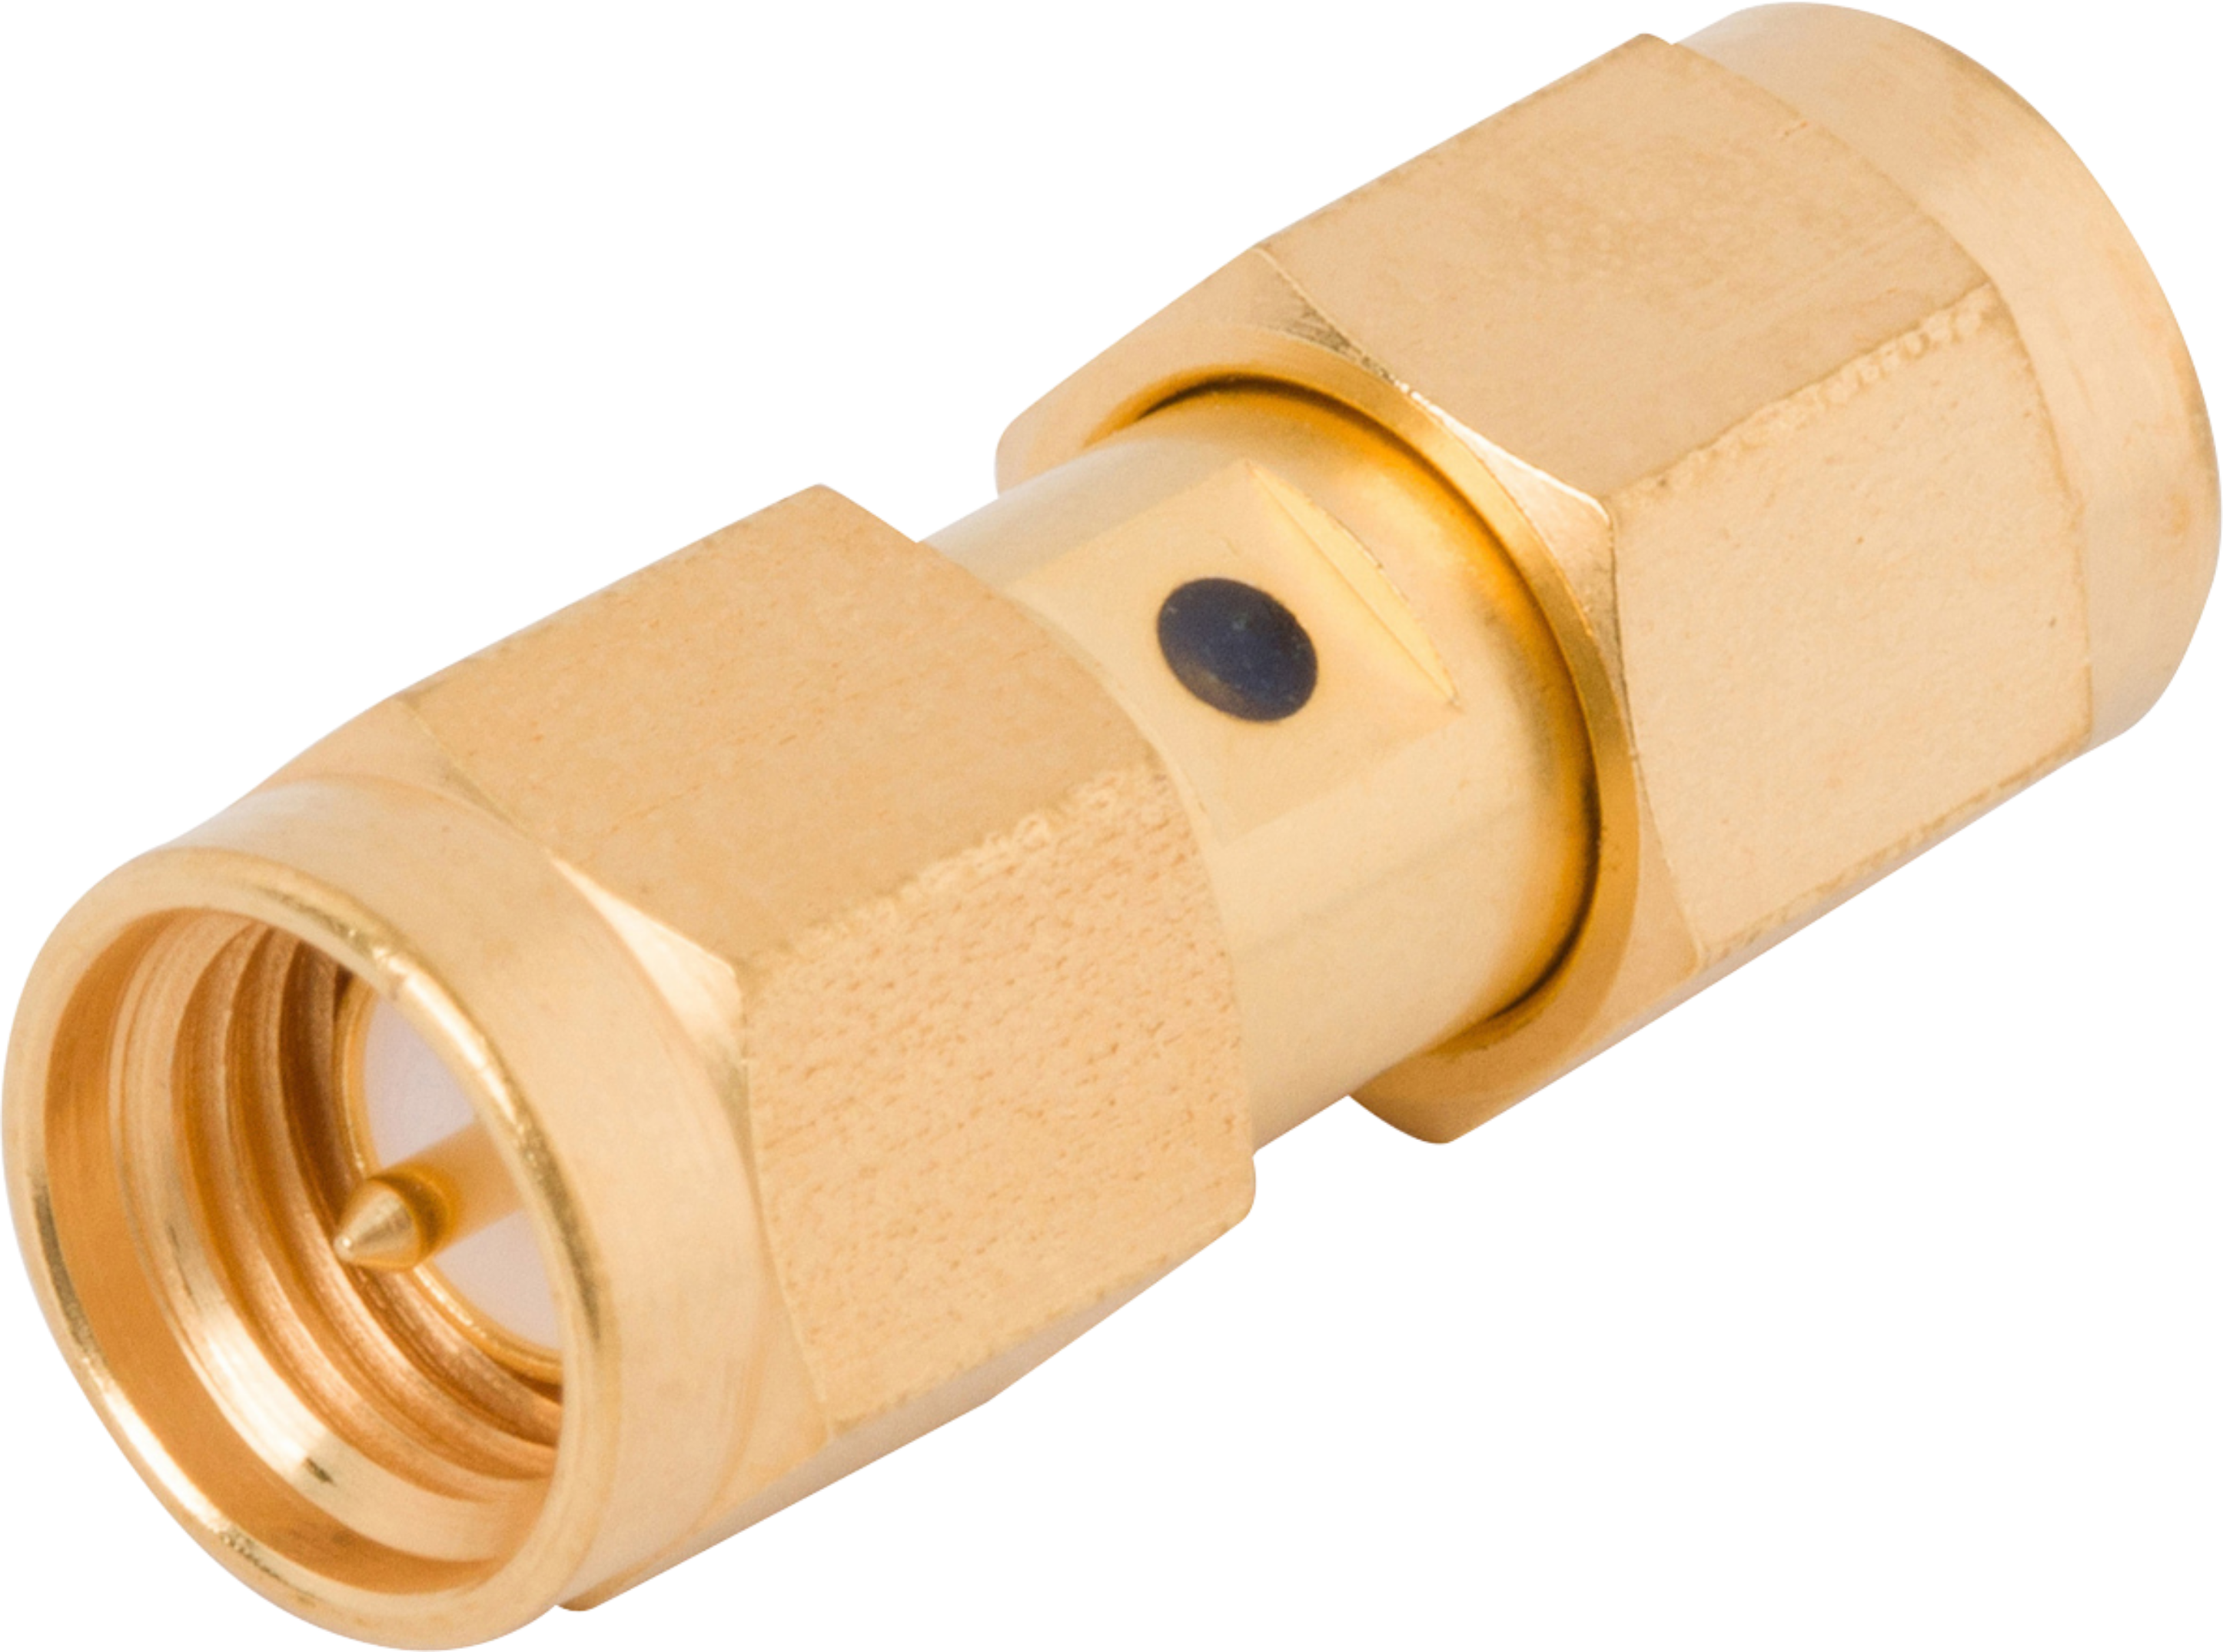 Picture of SMA Male to Male Adapter